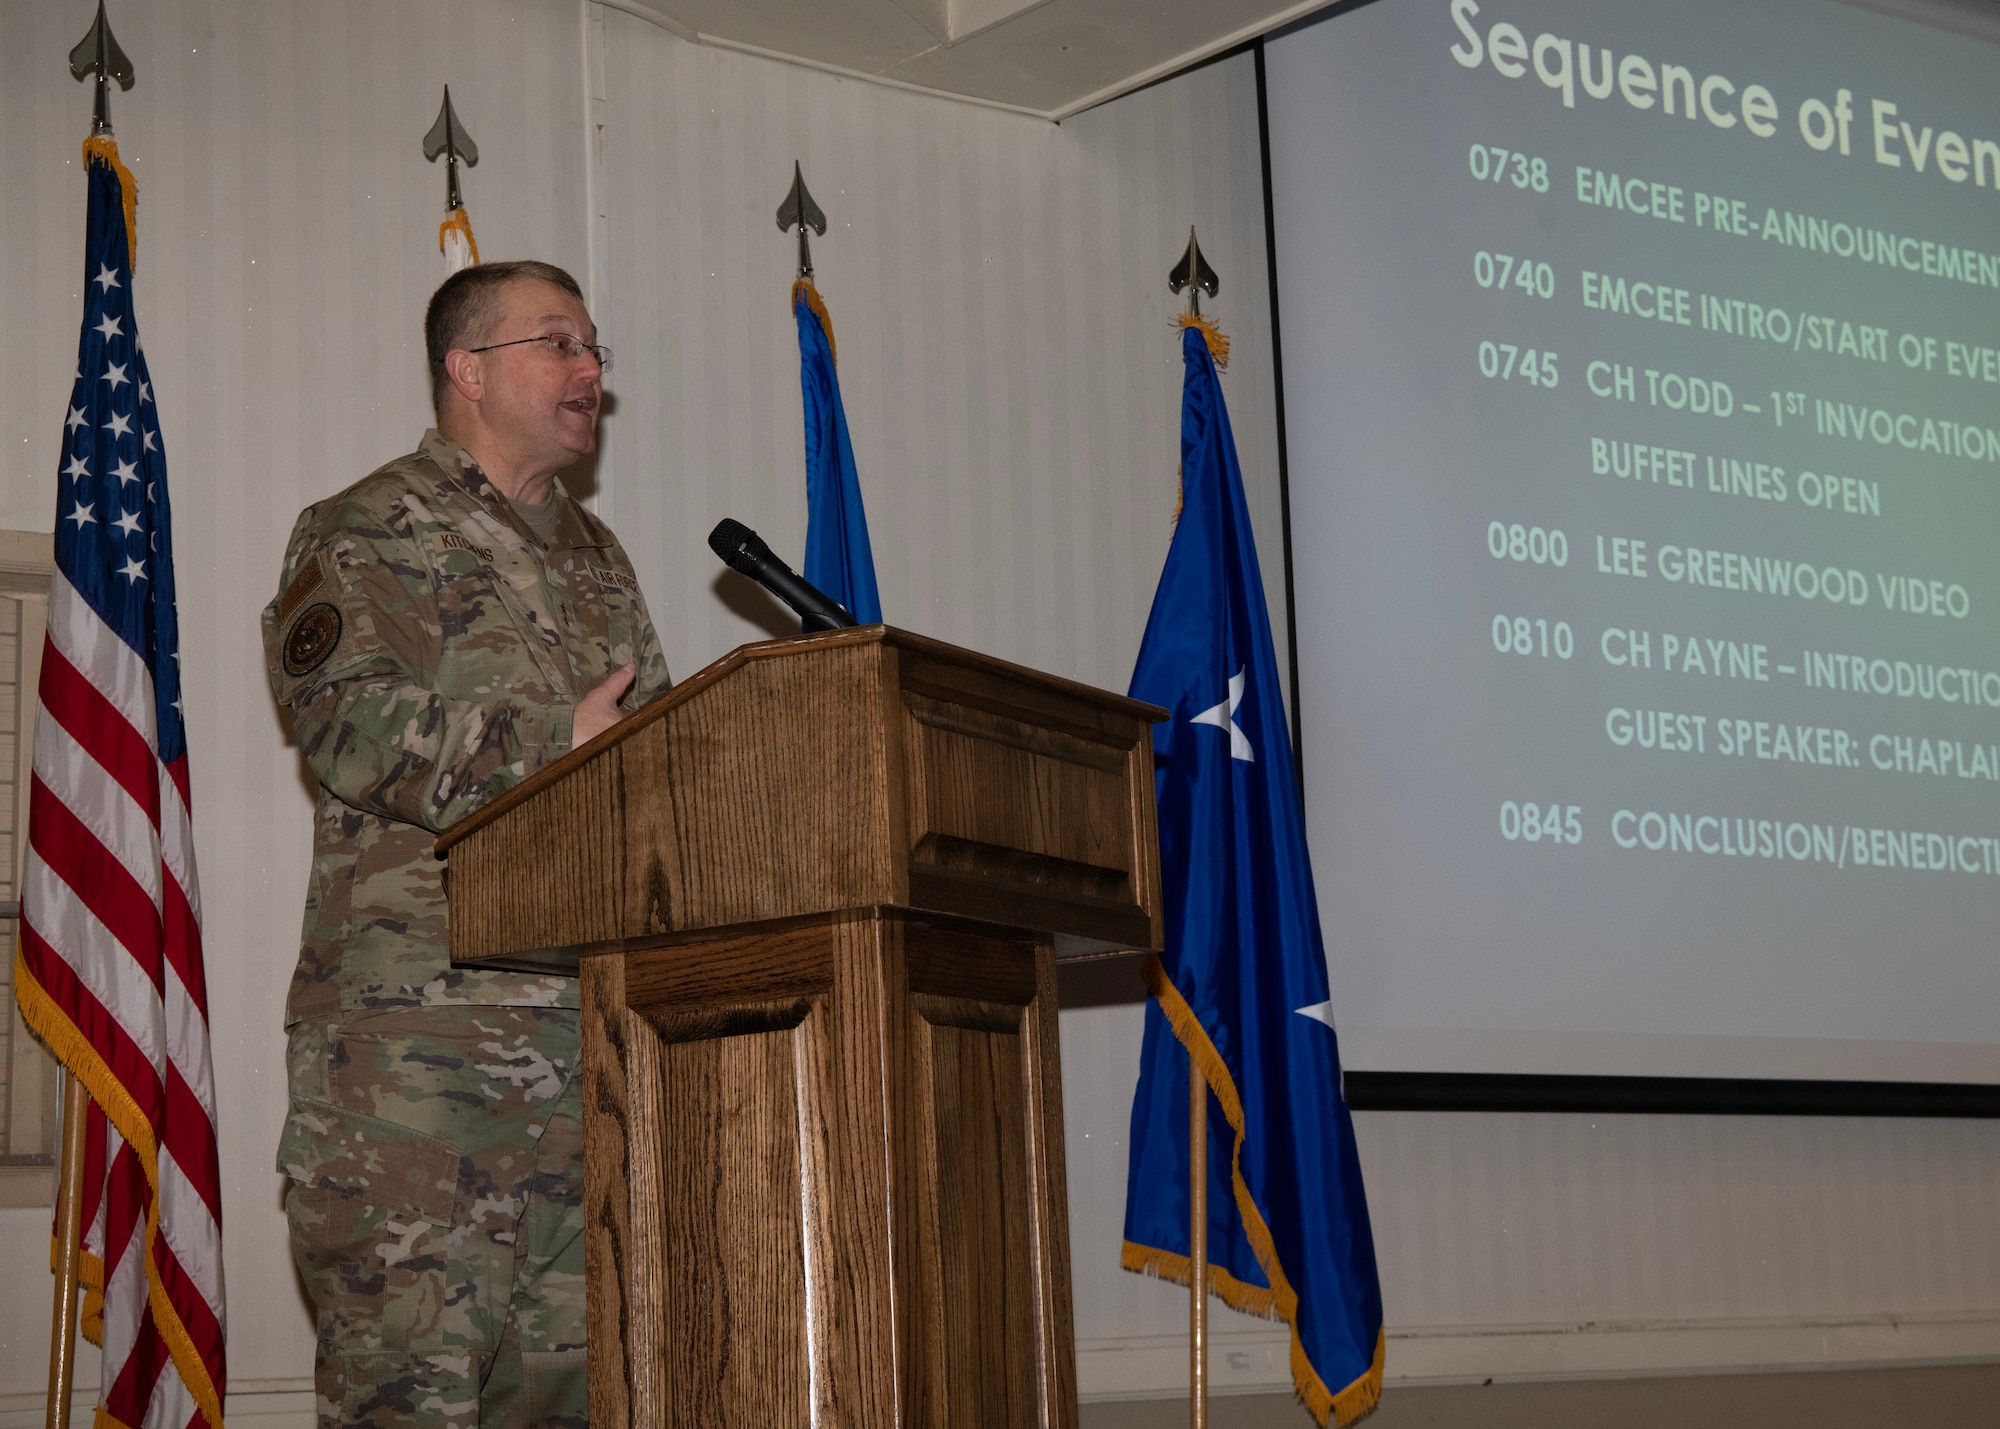 U.S. Air Force Ch. (Maj. Gen.) Randall Kitchens, Department of the Air Force chief of chaplains, delivers a speech to the Wolf Pack at Kunsan Air Base, Republic of Korea, Feb. 24, 2023. Kitchens was the Protestant Chaplain for the 8th Fighter Wing in 1997 to 1998. (U.S. Air Force photo by Senior Airman Akeem K. Campbell)